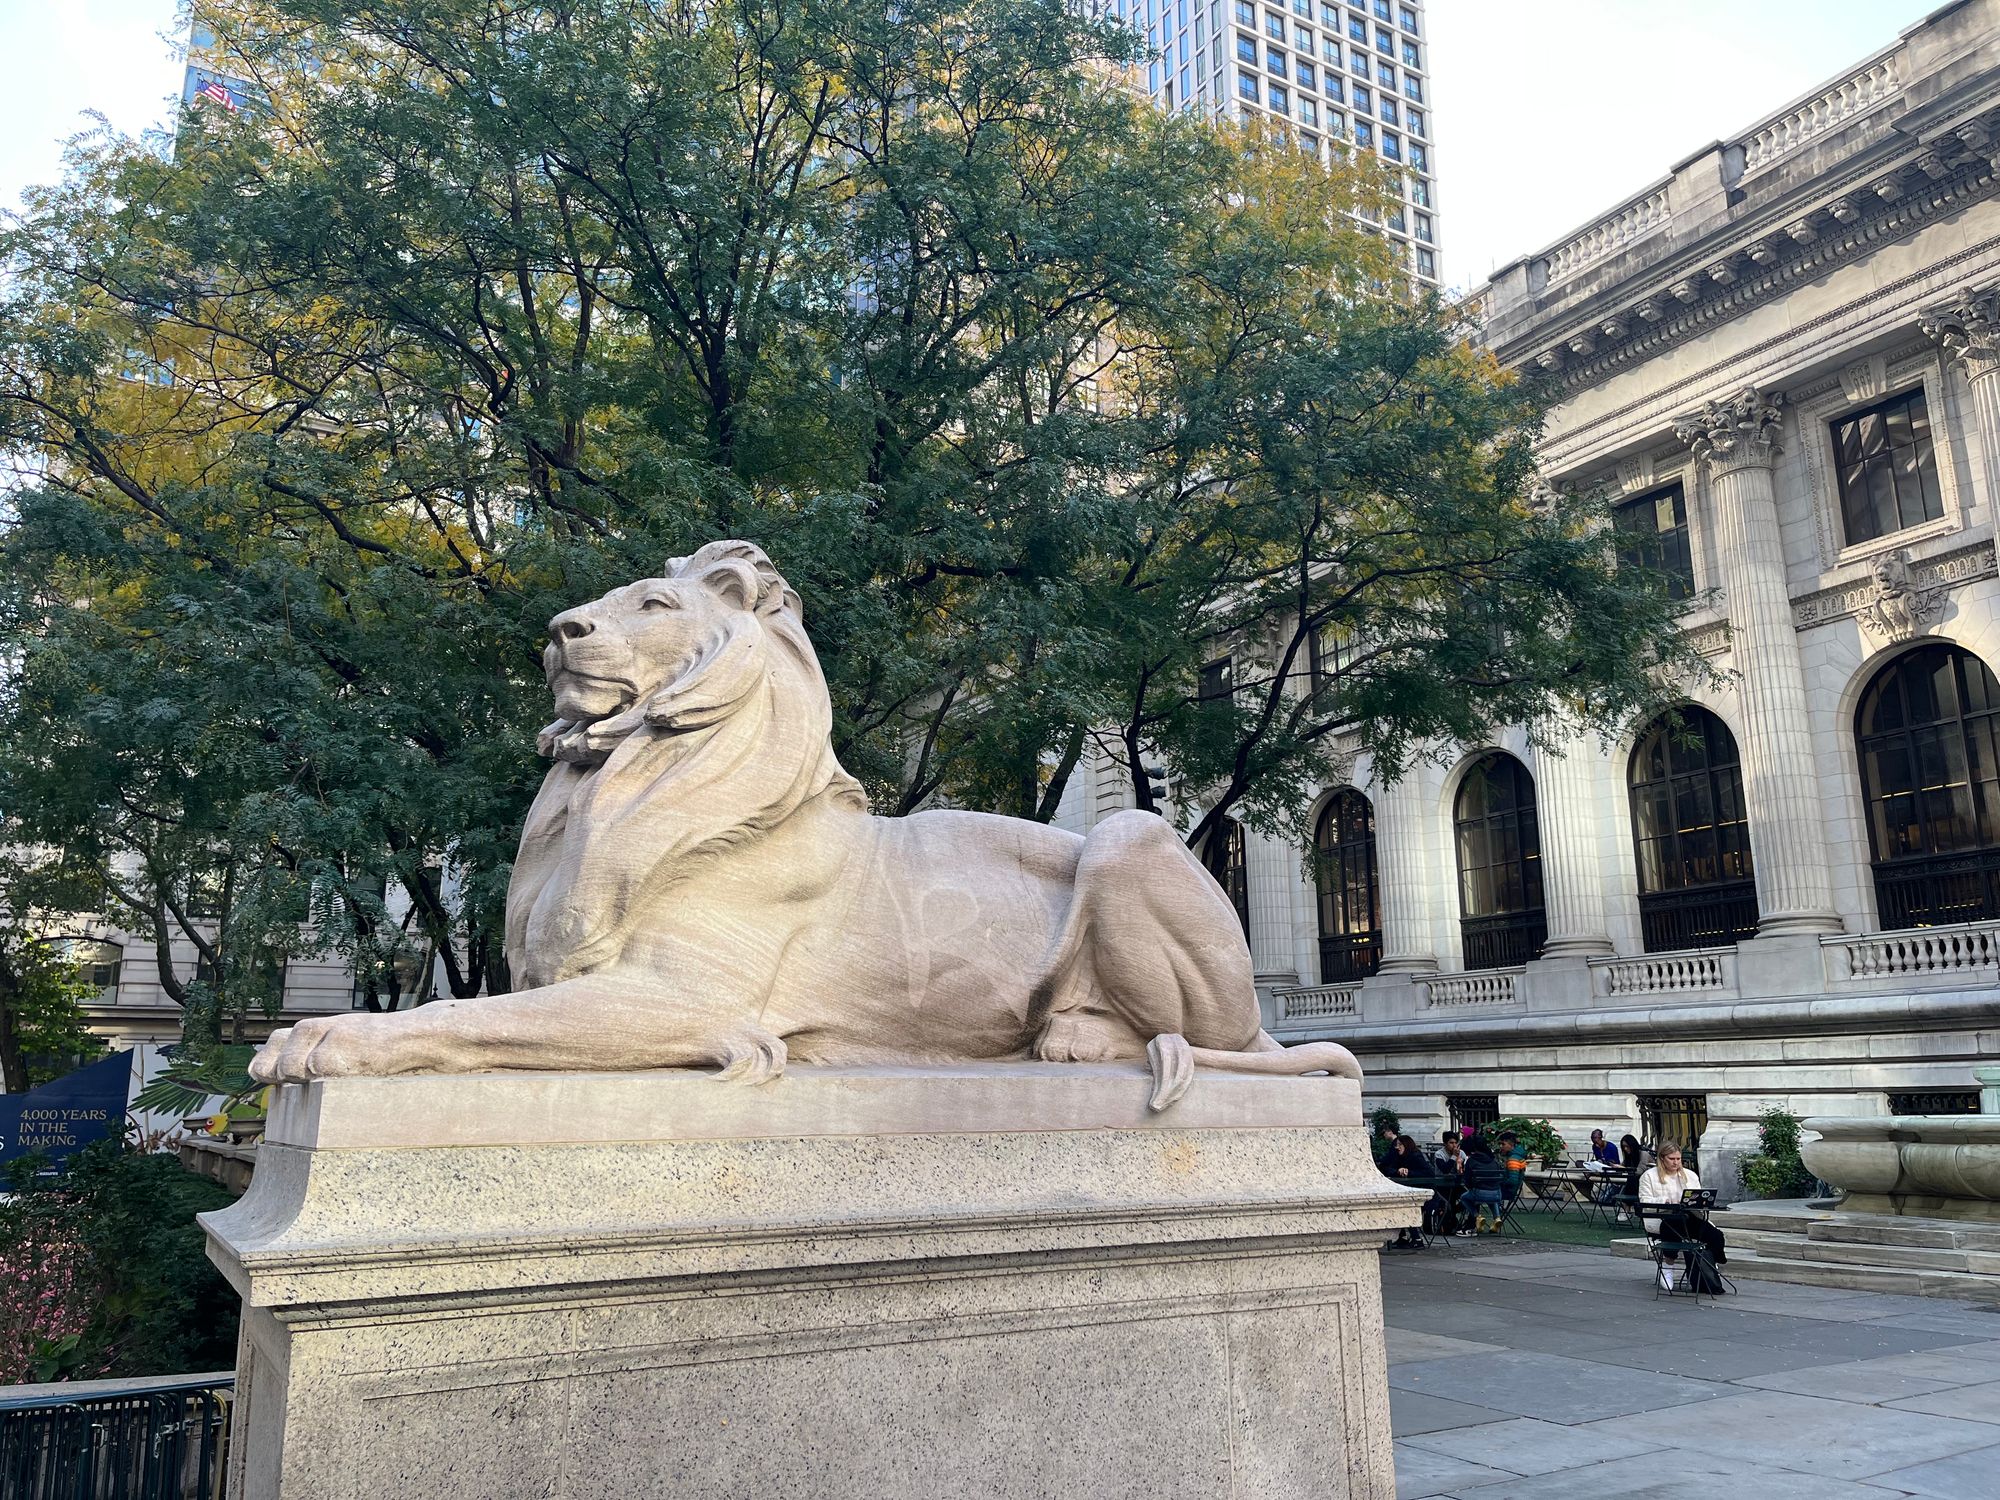 A large stone lion, bigger than life, on a pedestal pictured from the right. In the background, a tree, a building with white columns, and a skyscraper.